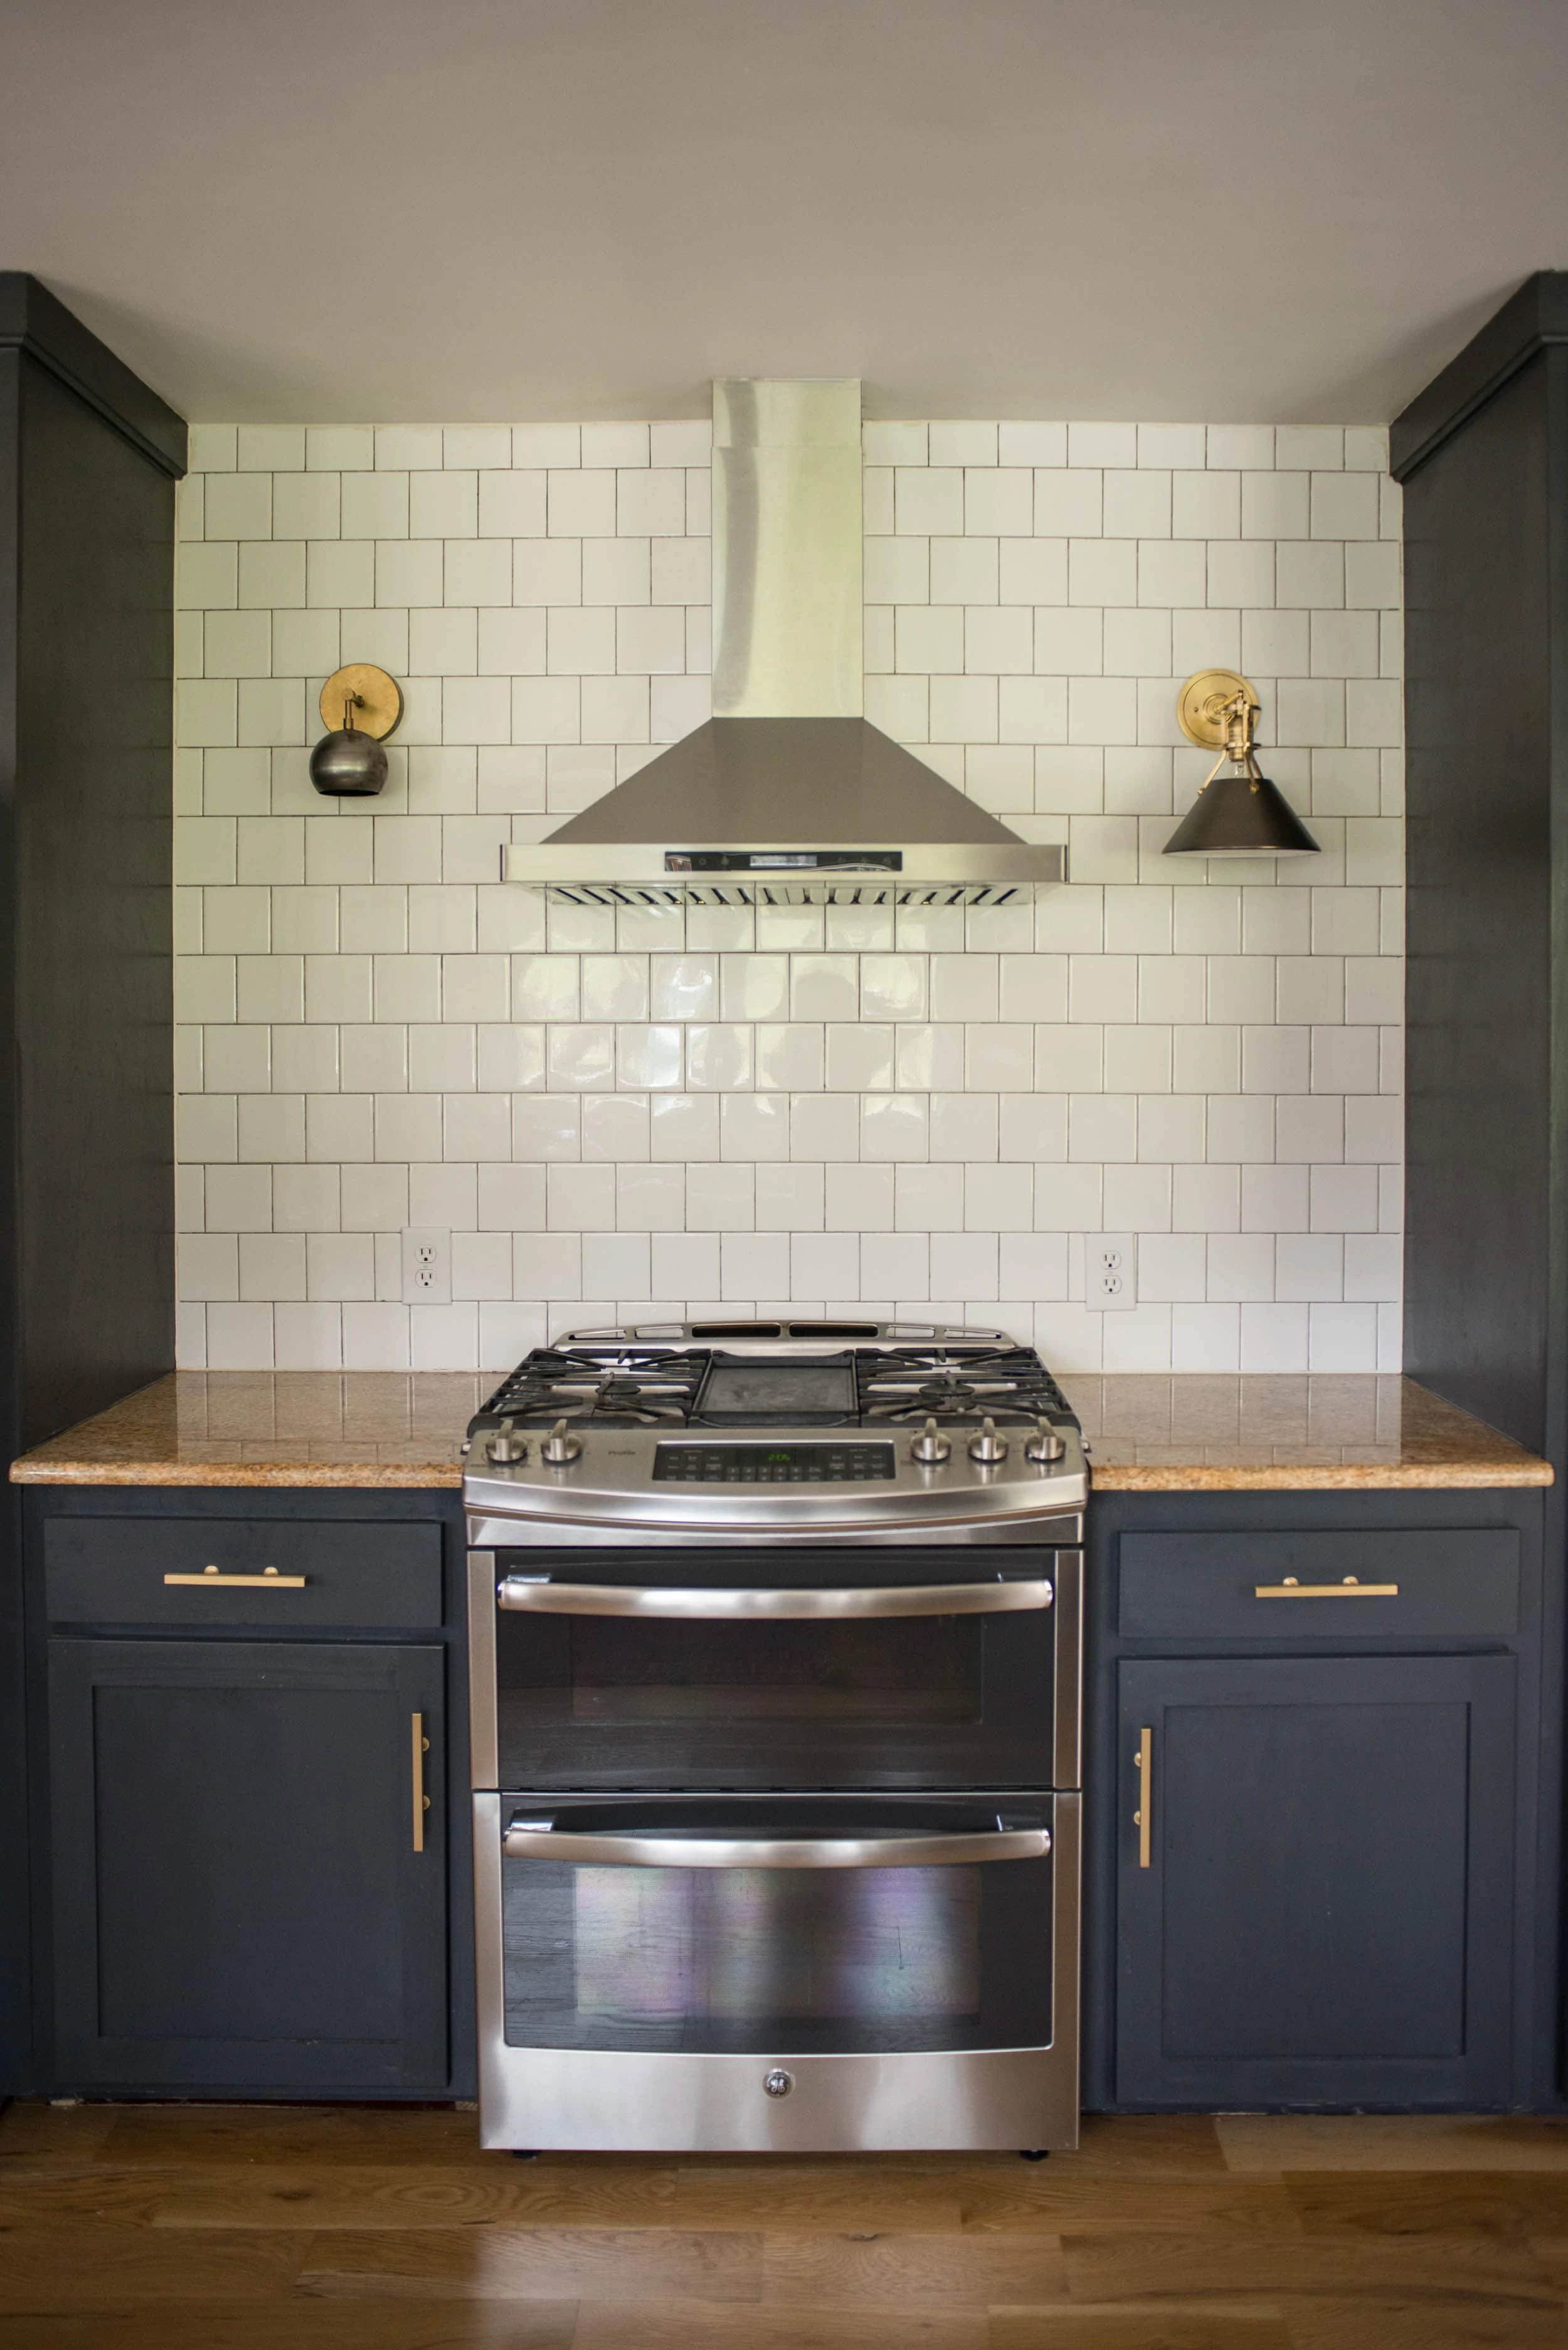 Different kitchen sconces showing scale on each side of oven.